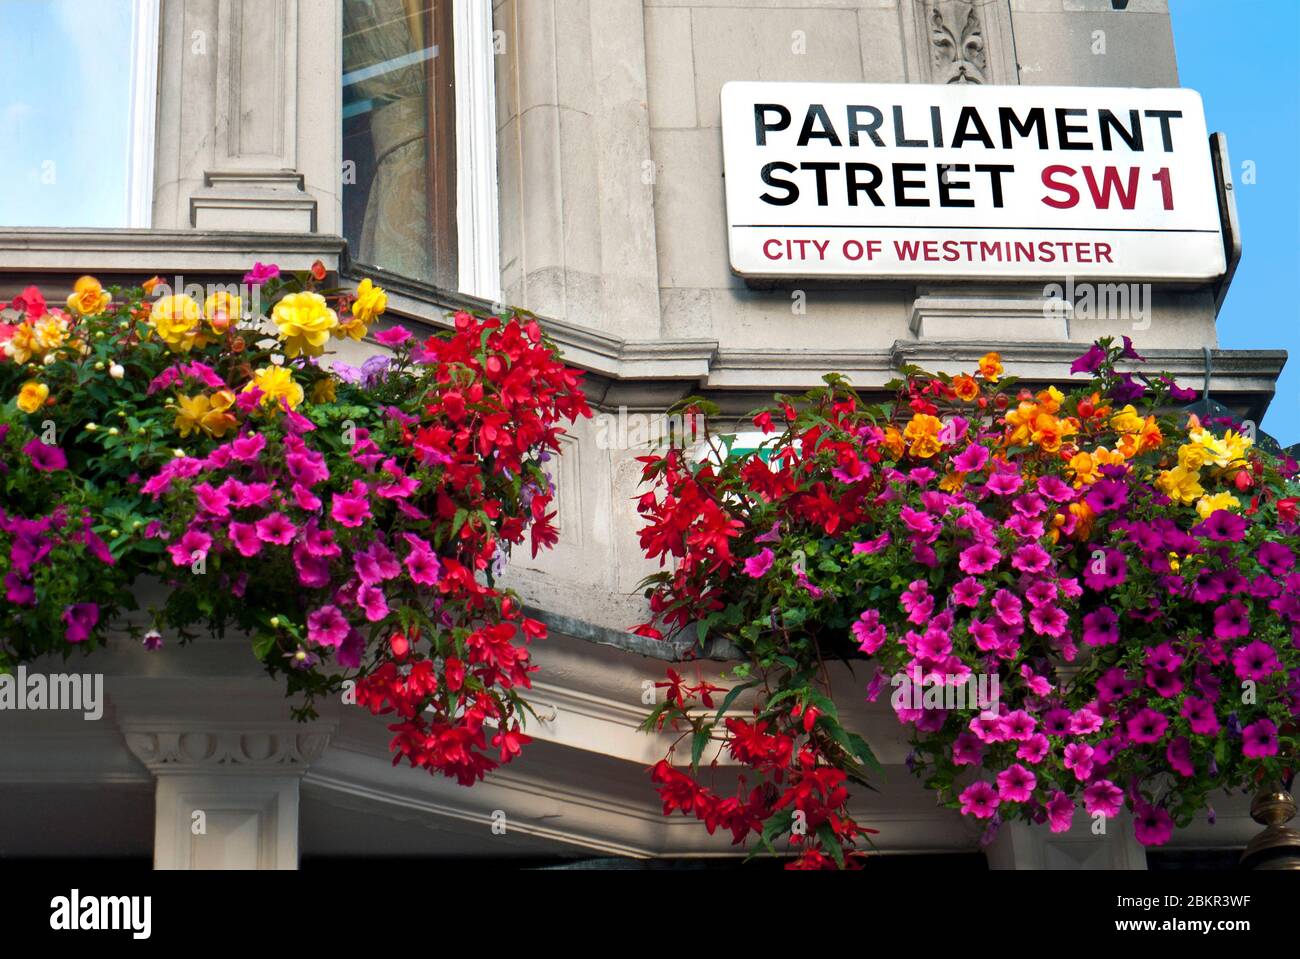 'Parliament Street SW1 ULEZ City of Westminster' cartello stradale con petunias in cesti pendenti, Houses of Parliament e 10 Downing Street London SW1 Foto Stock